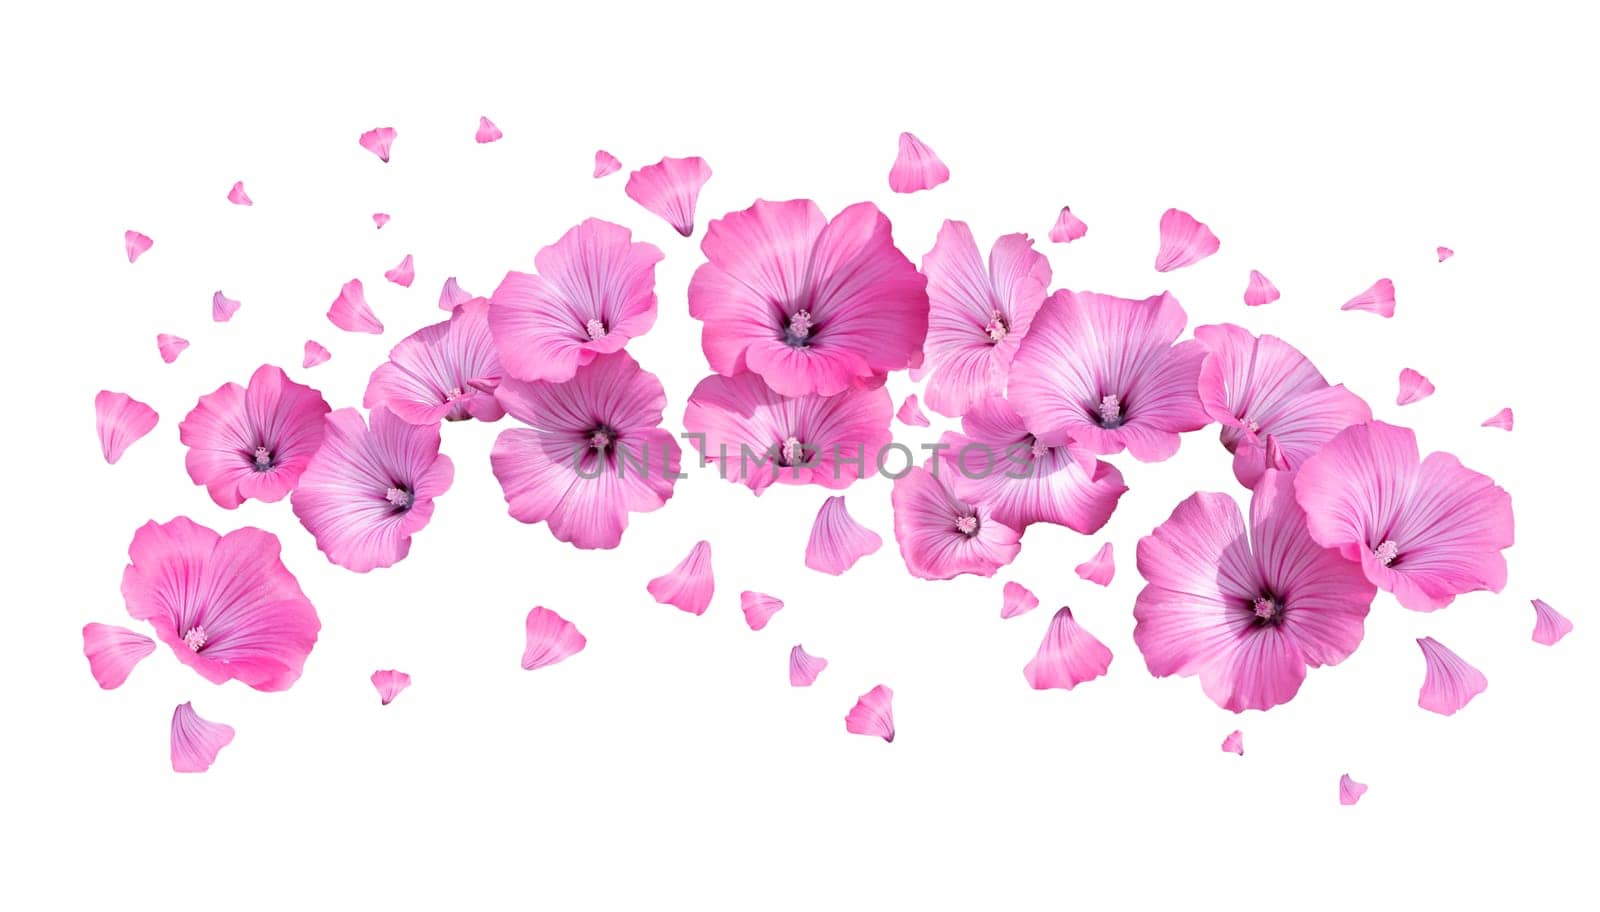 flowers scatter with petals on a white background by drakuliren